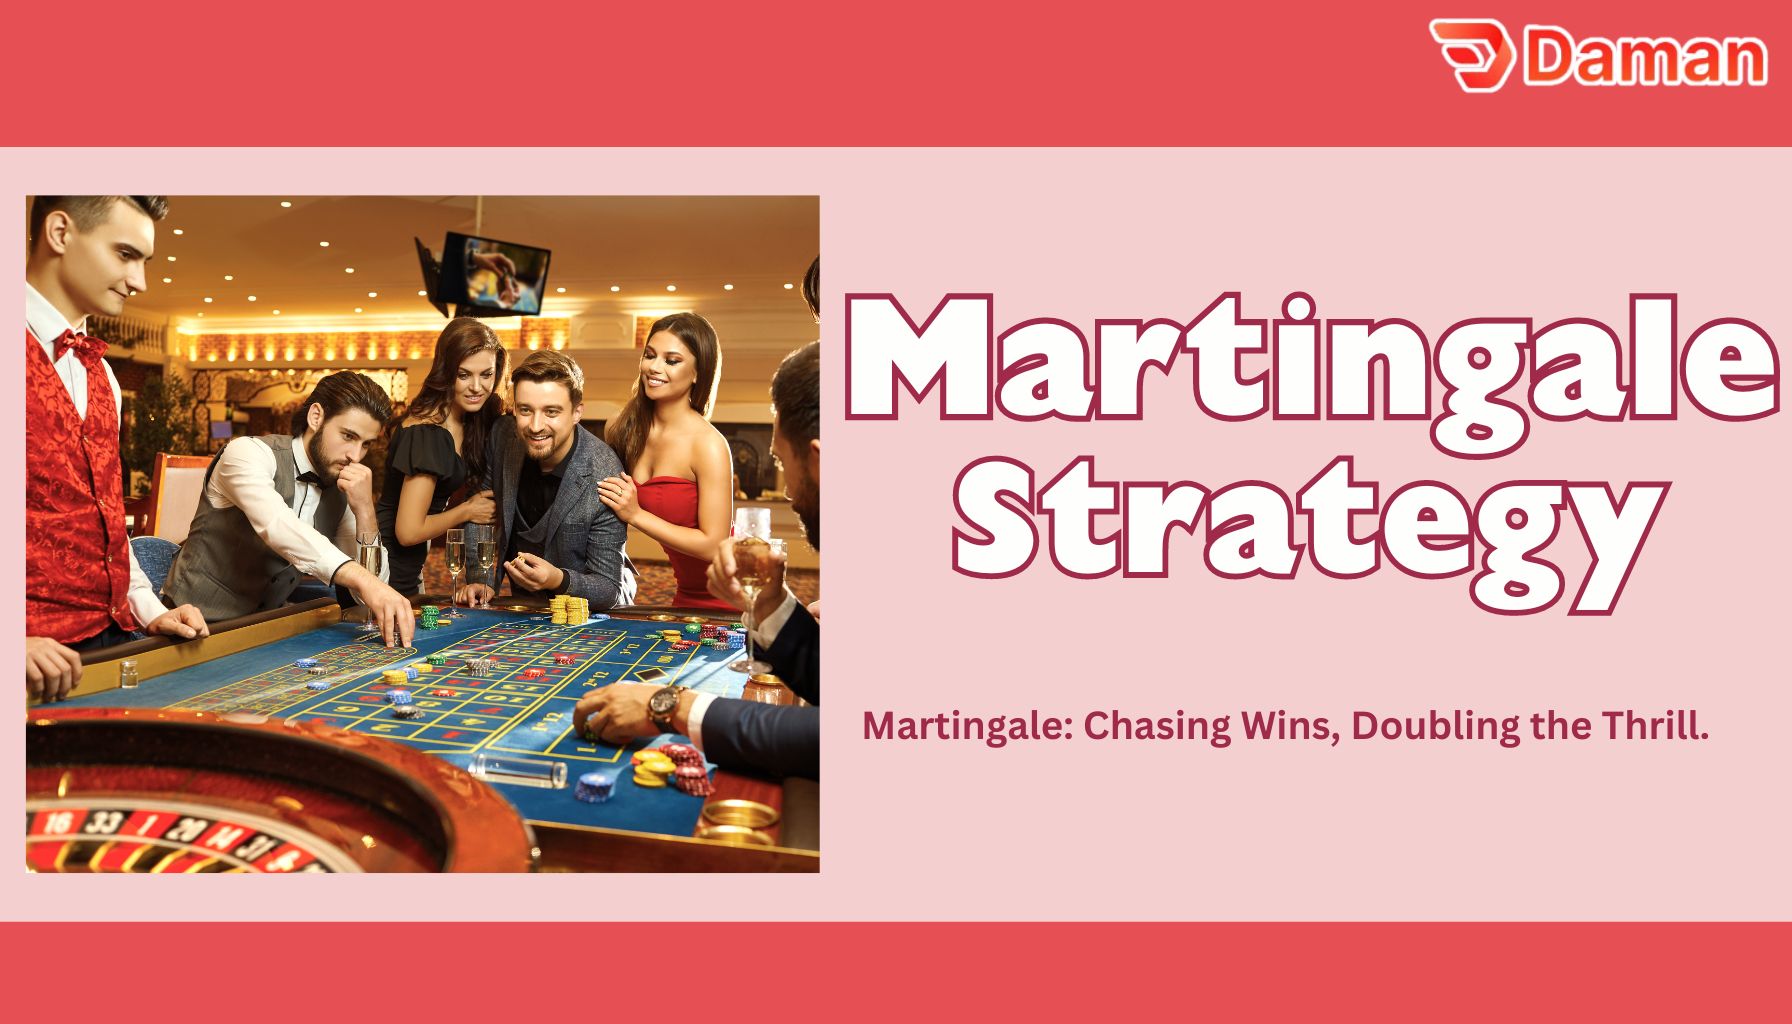 an image of people playing using martingale strategy